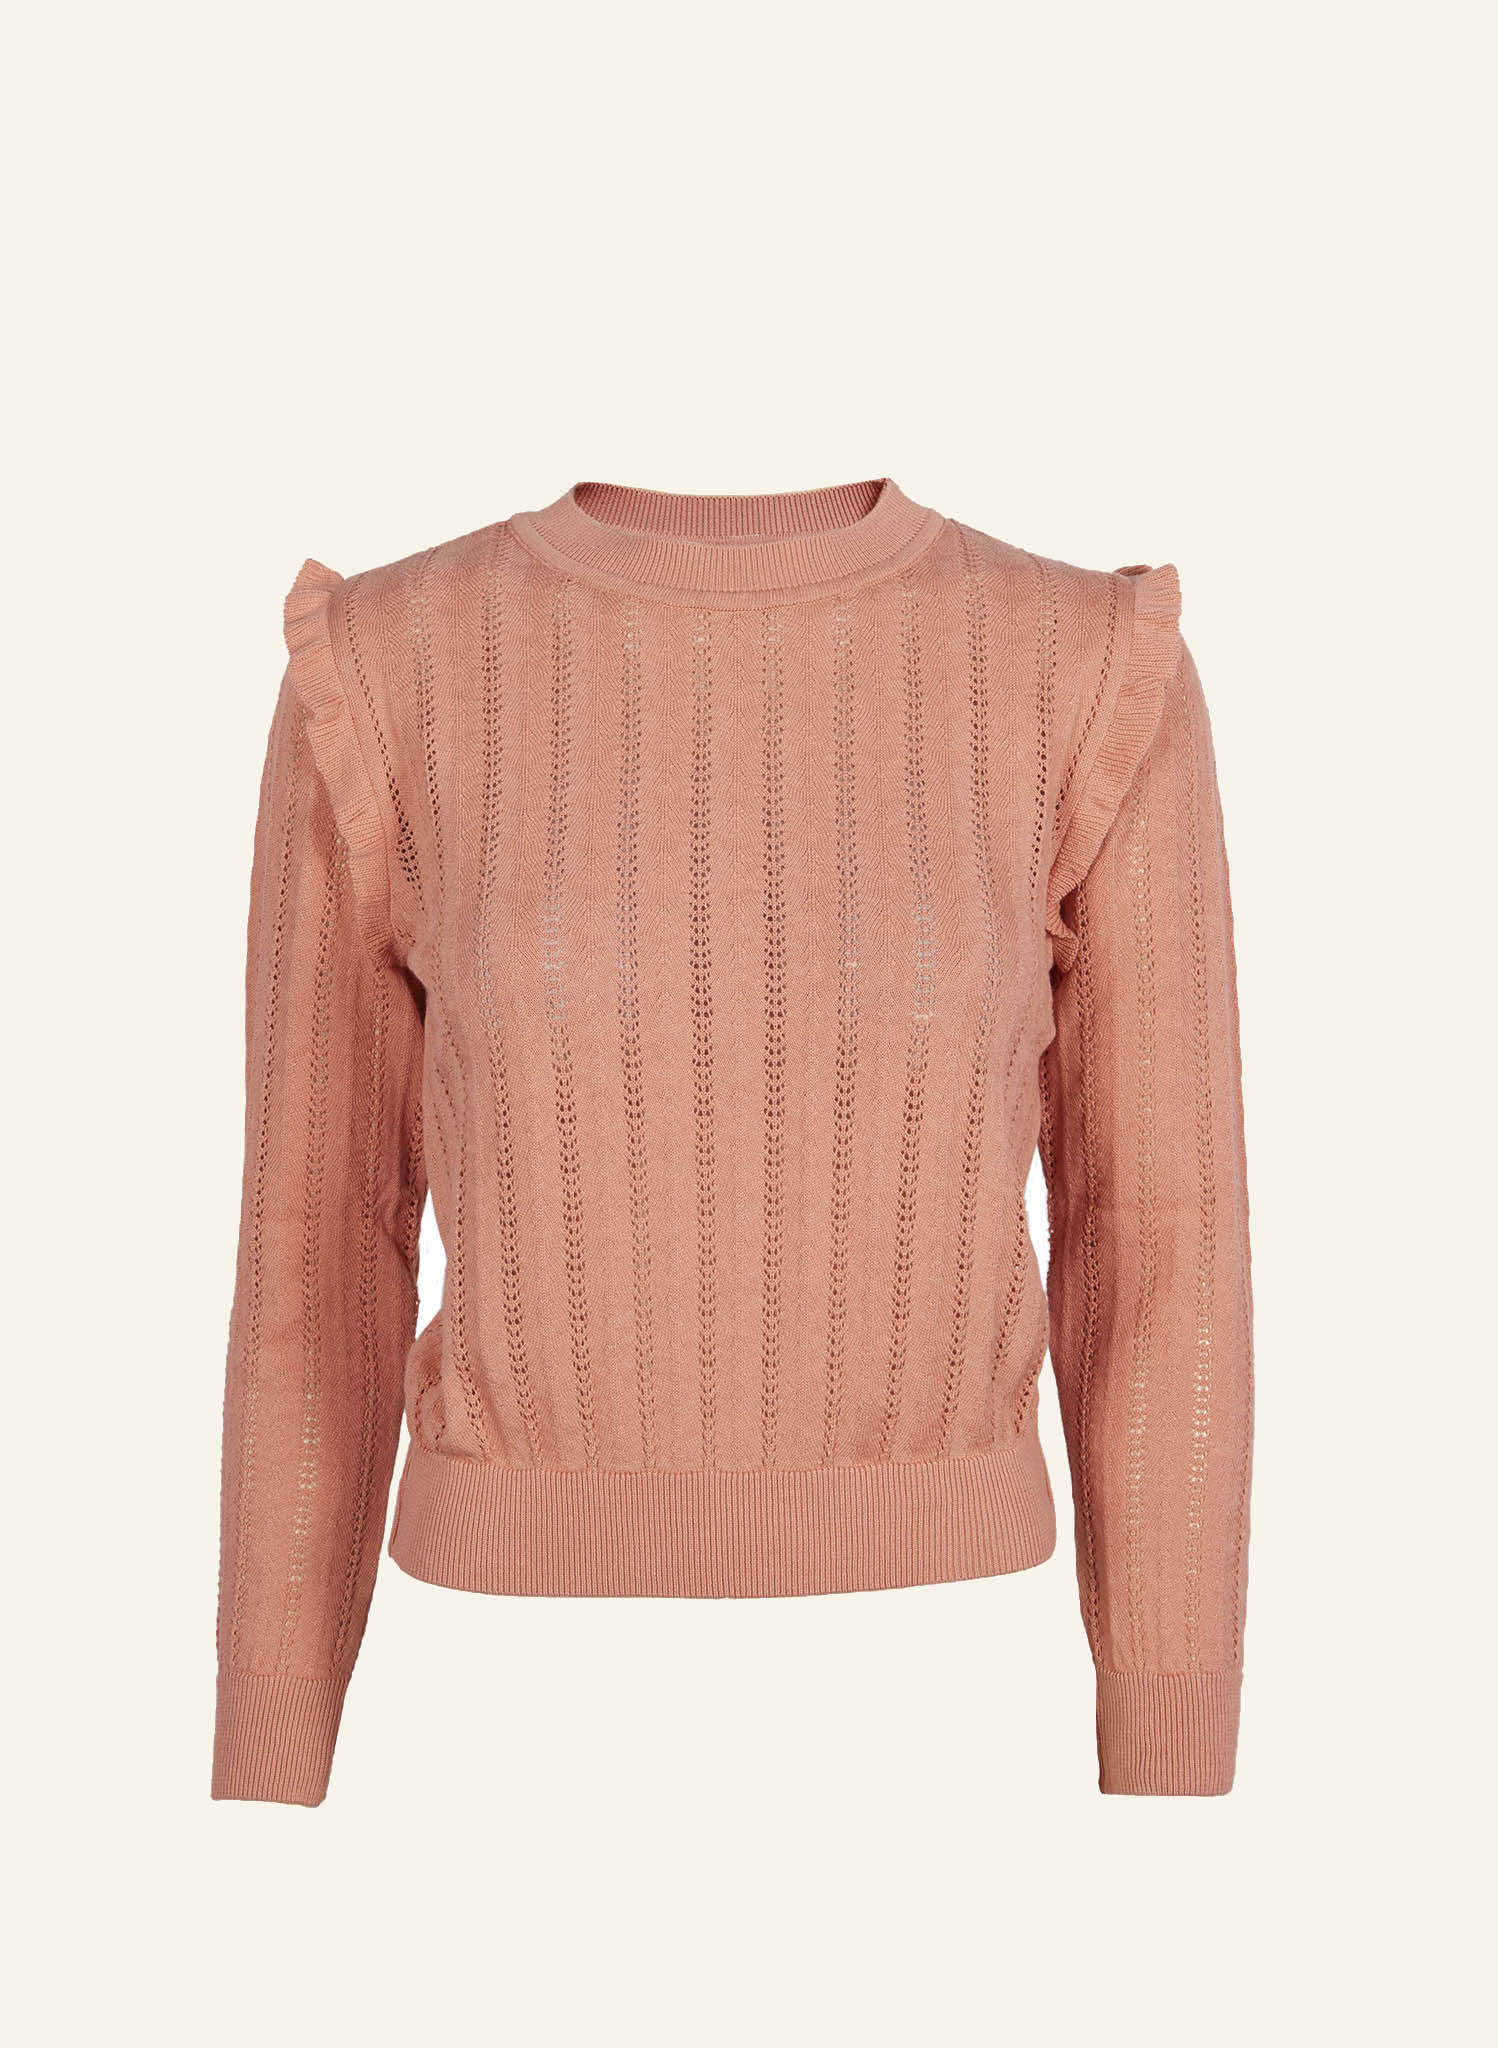 Diana - Pink Ruffle Knitted Top